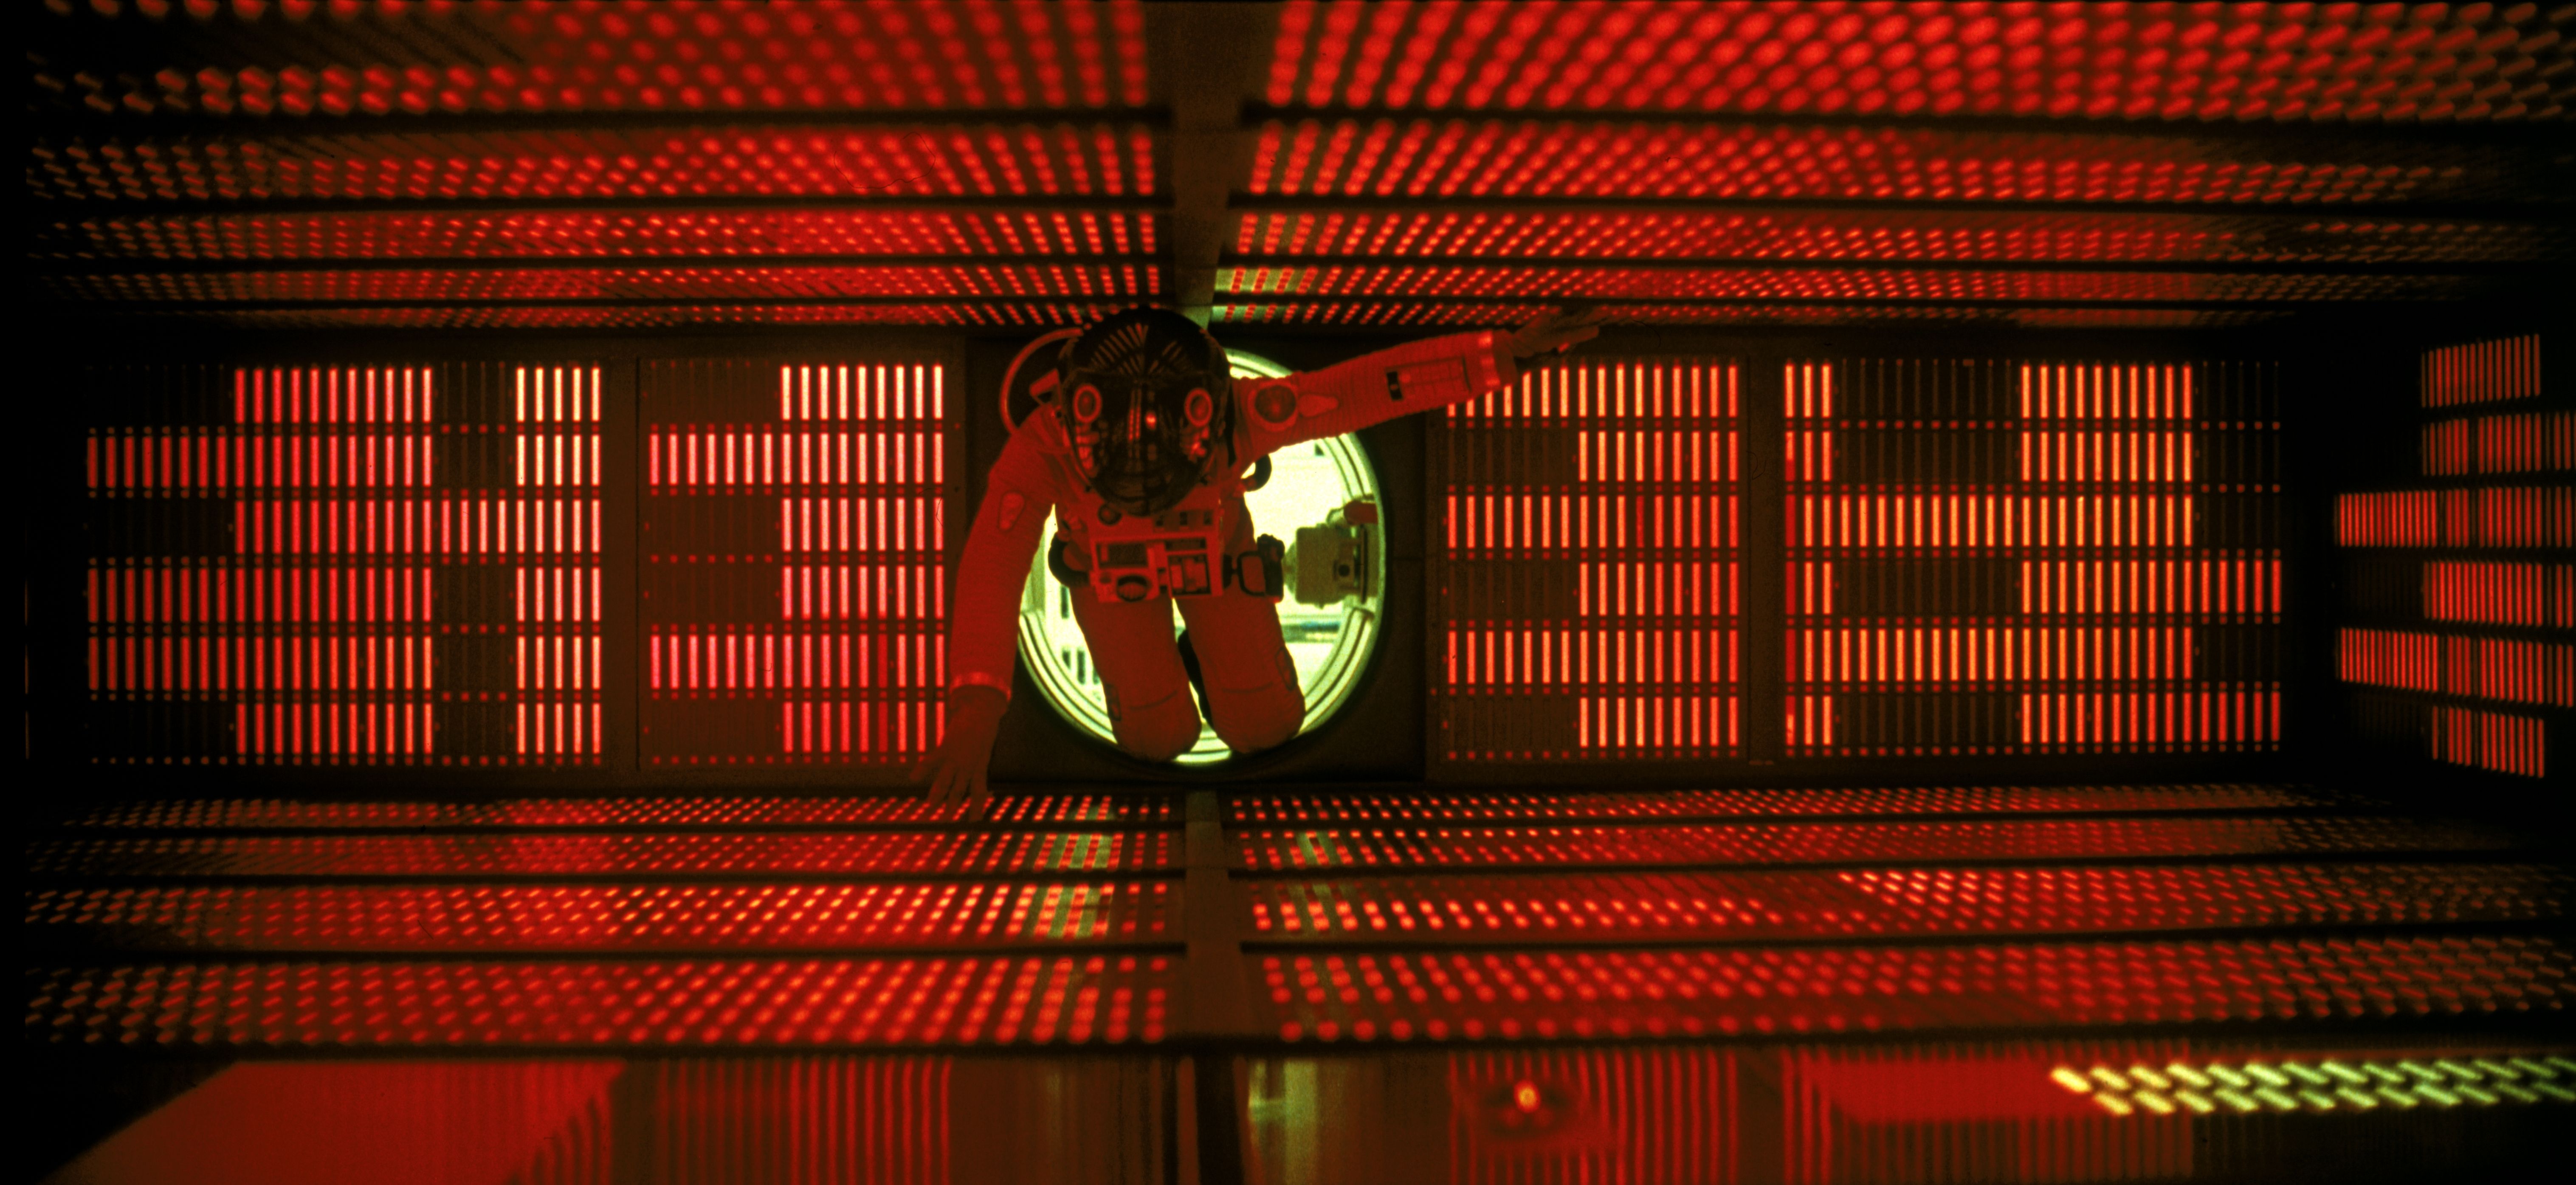 2001: A Space Odyssey wallpaper, Movie, HQ 2001: A Space Odyssey